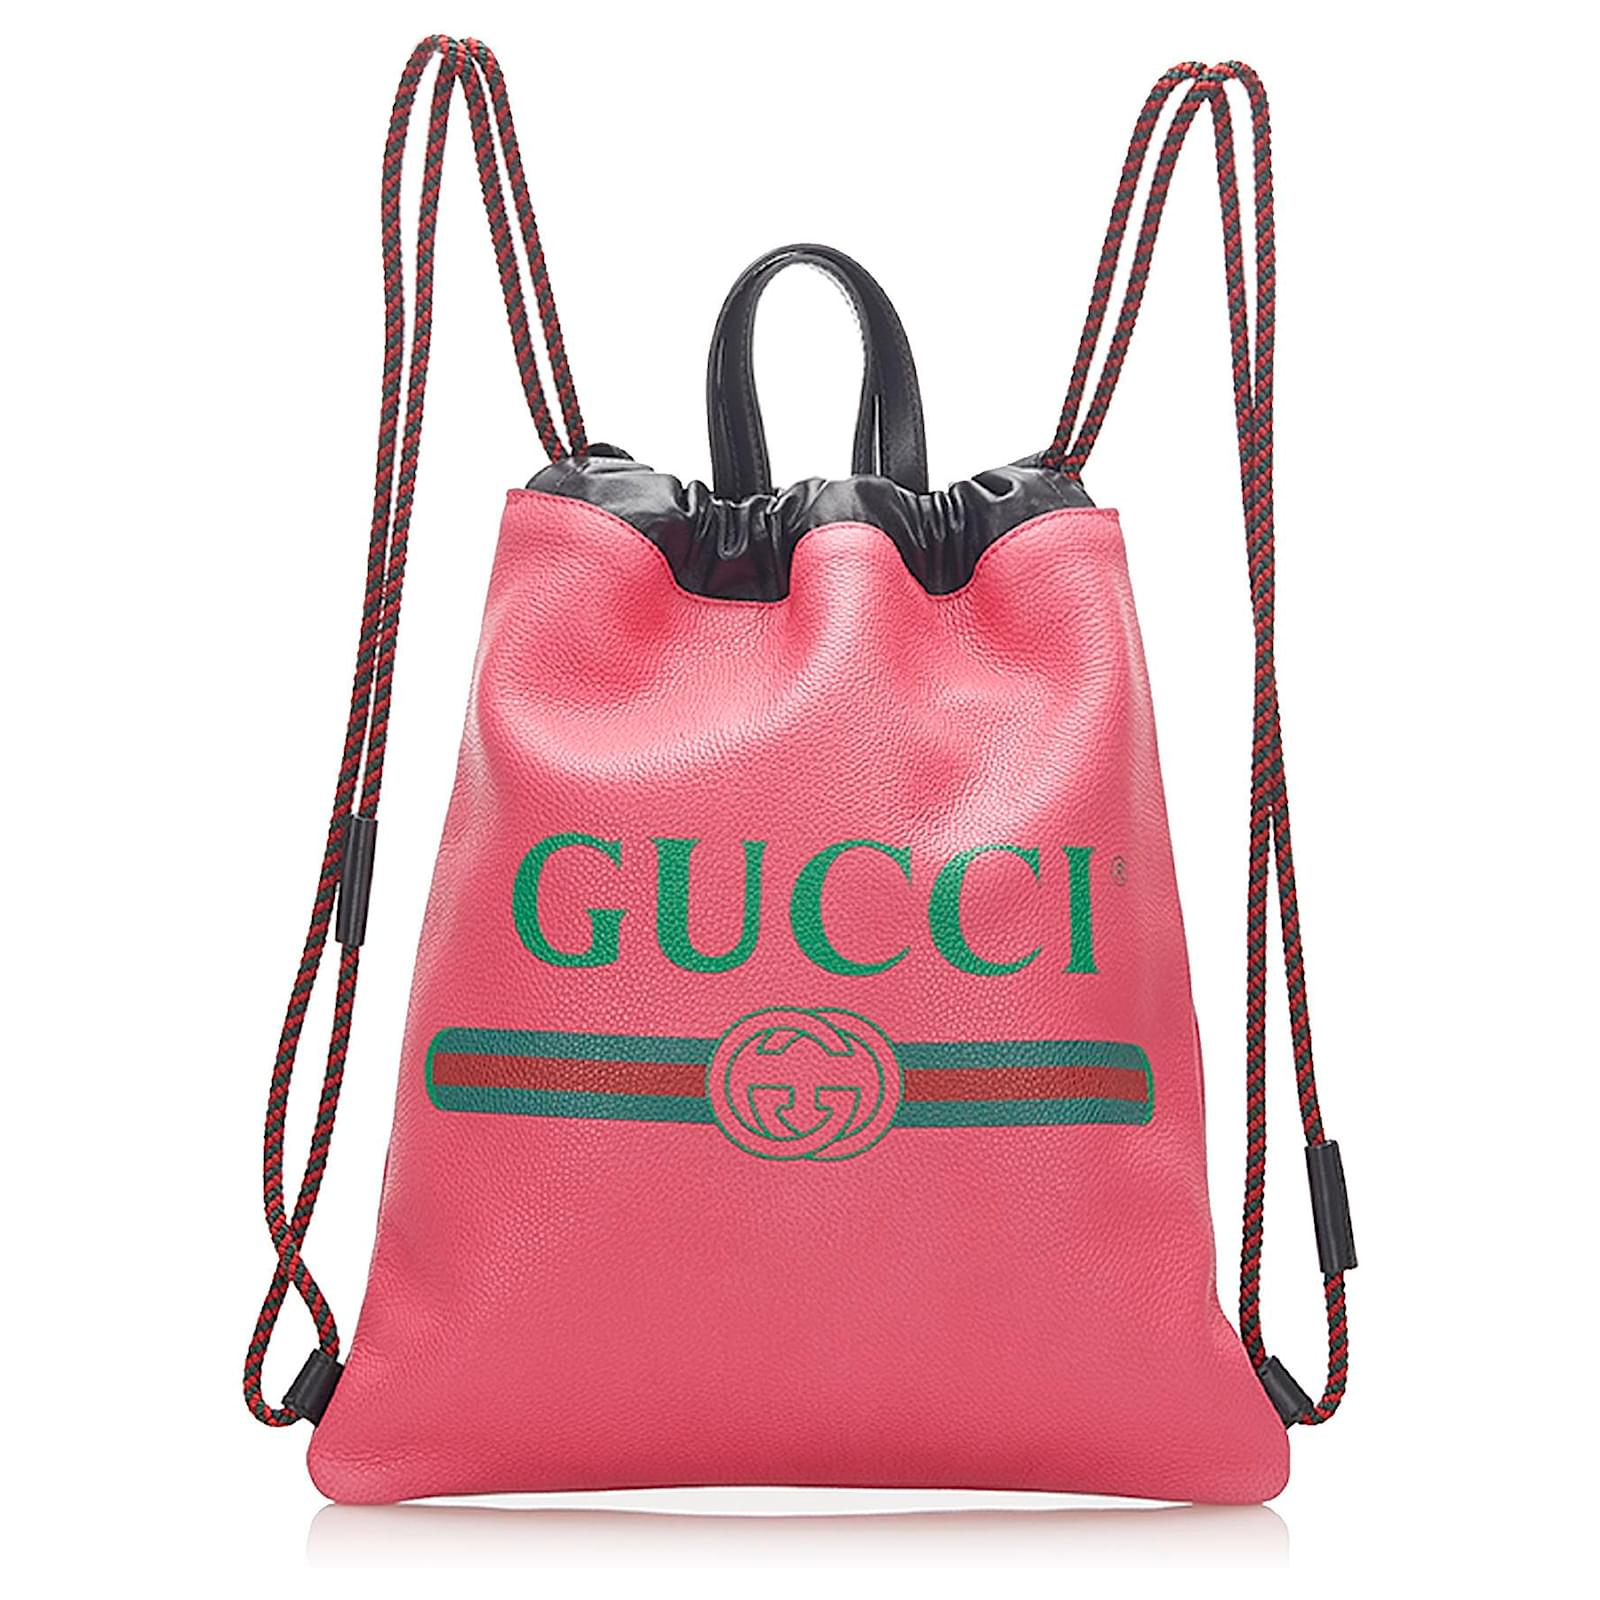 Gucci Pink Logo Drawstring Leather Backpack Multiple colors Pony-style ...